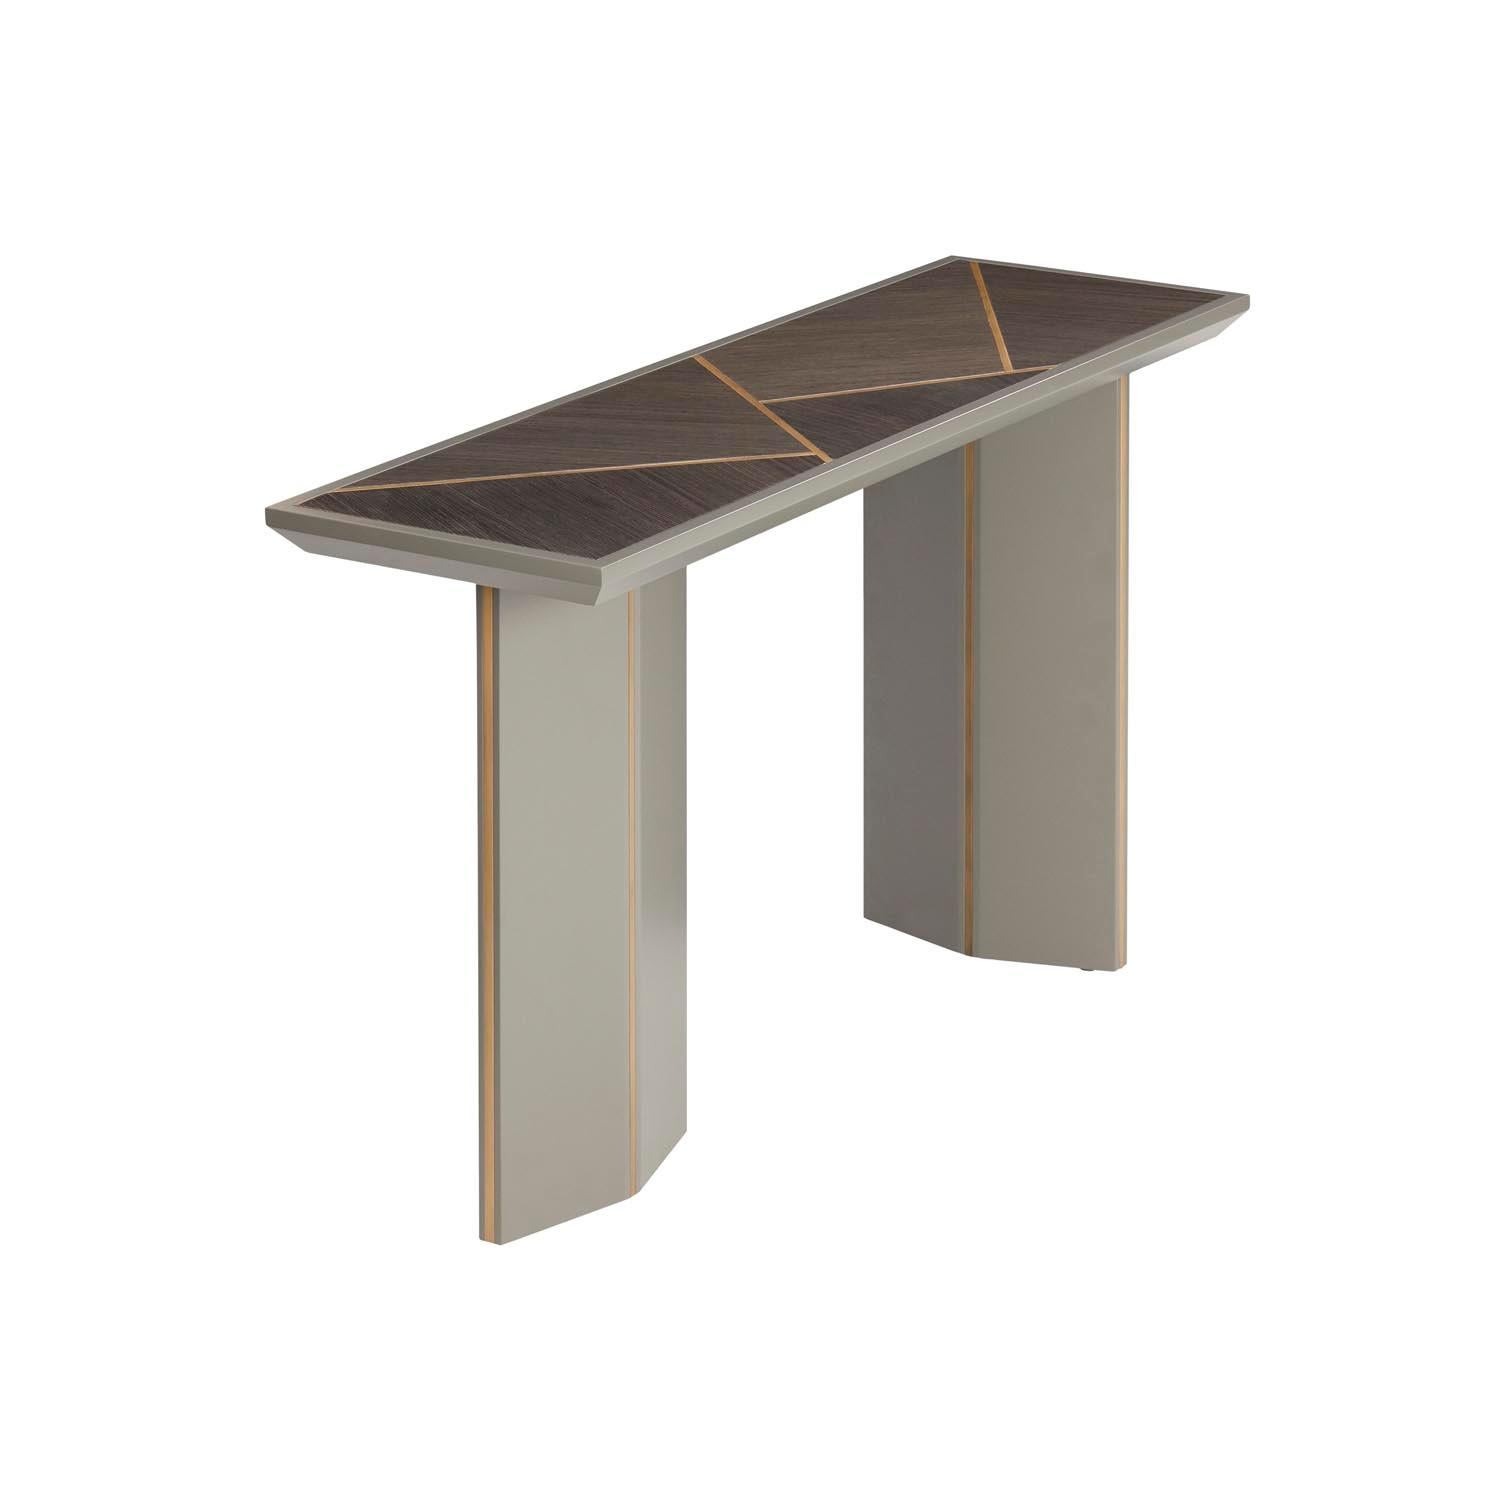 LORCA console is a bold design piece, with beautiful inlaid details on top and legs.‎ Made of lacquered and veneered wood, but available in a large collection of finishes to meet any design need.‎

Shown in glossy Grisio Gris veneered top, combined